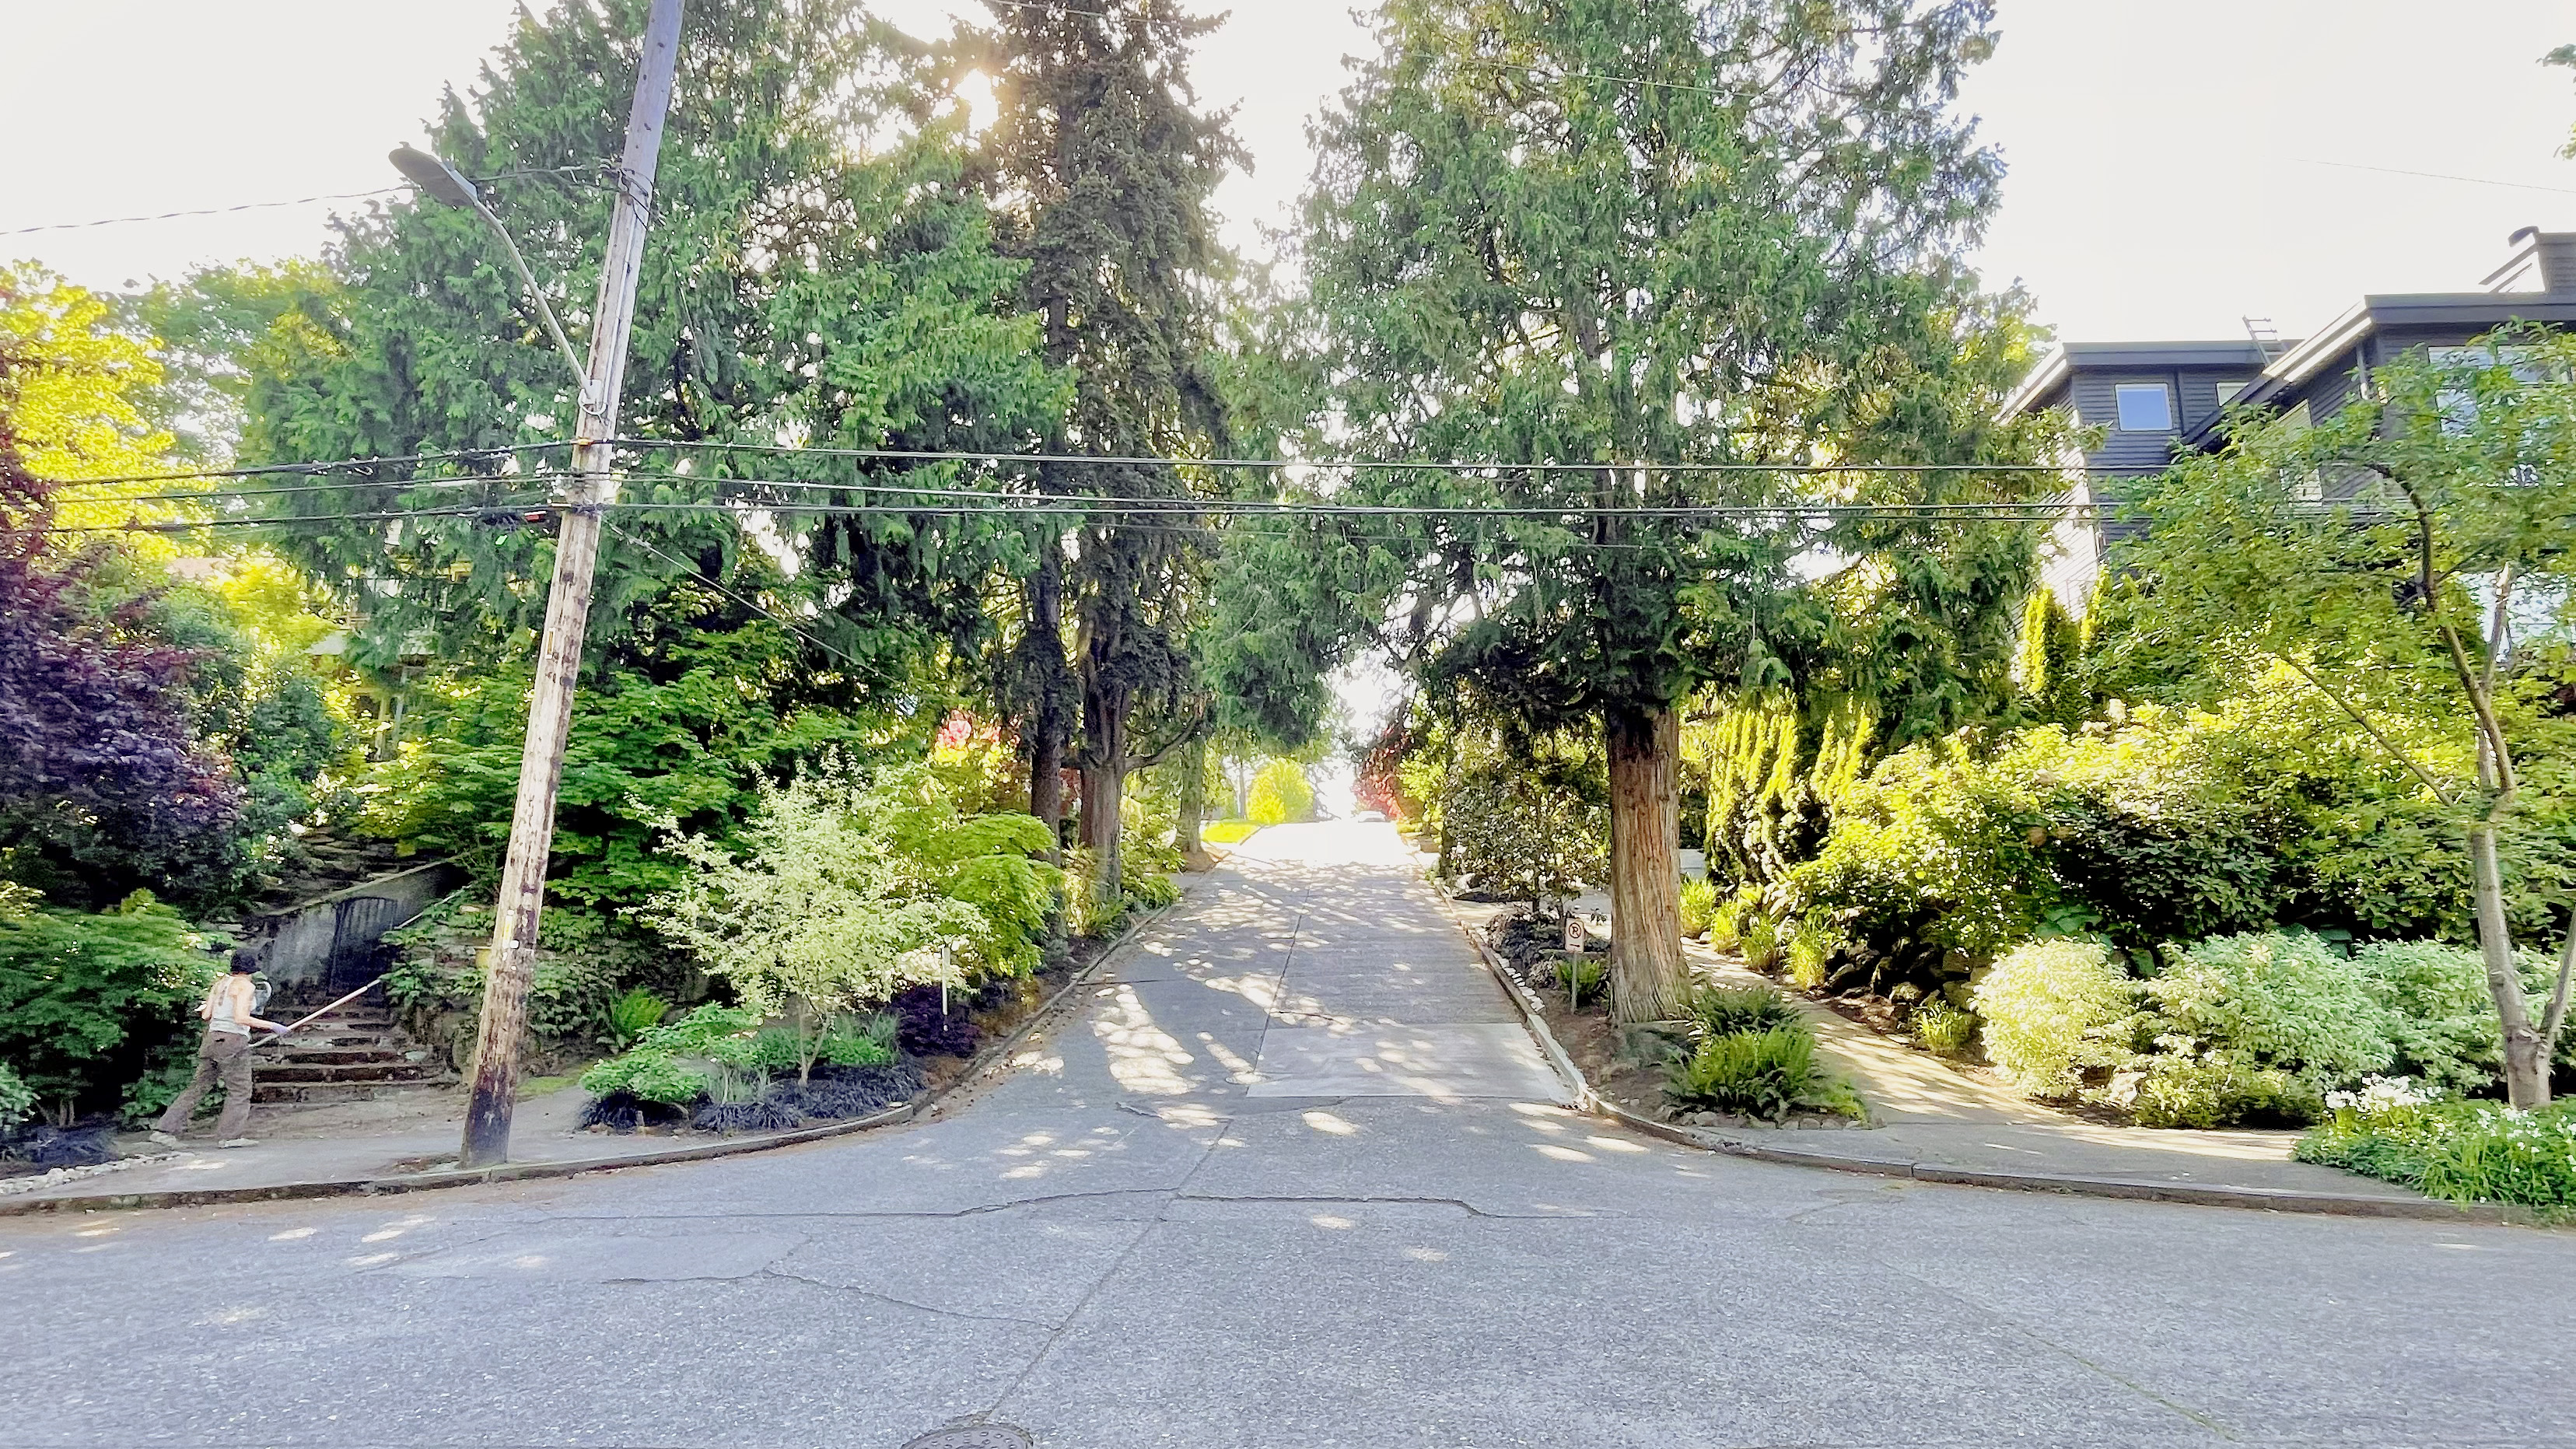 The steepest hill in Seattle, East Roy Street